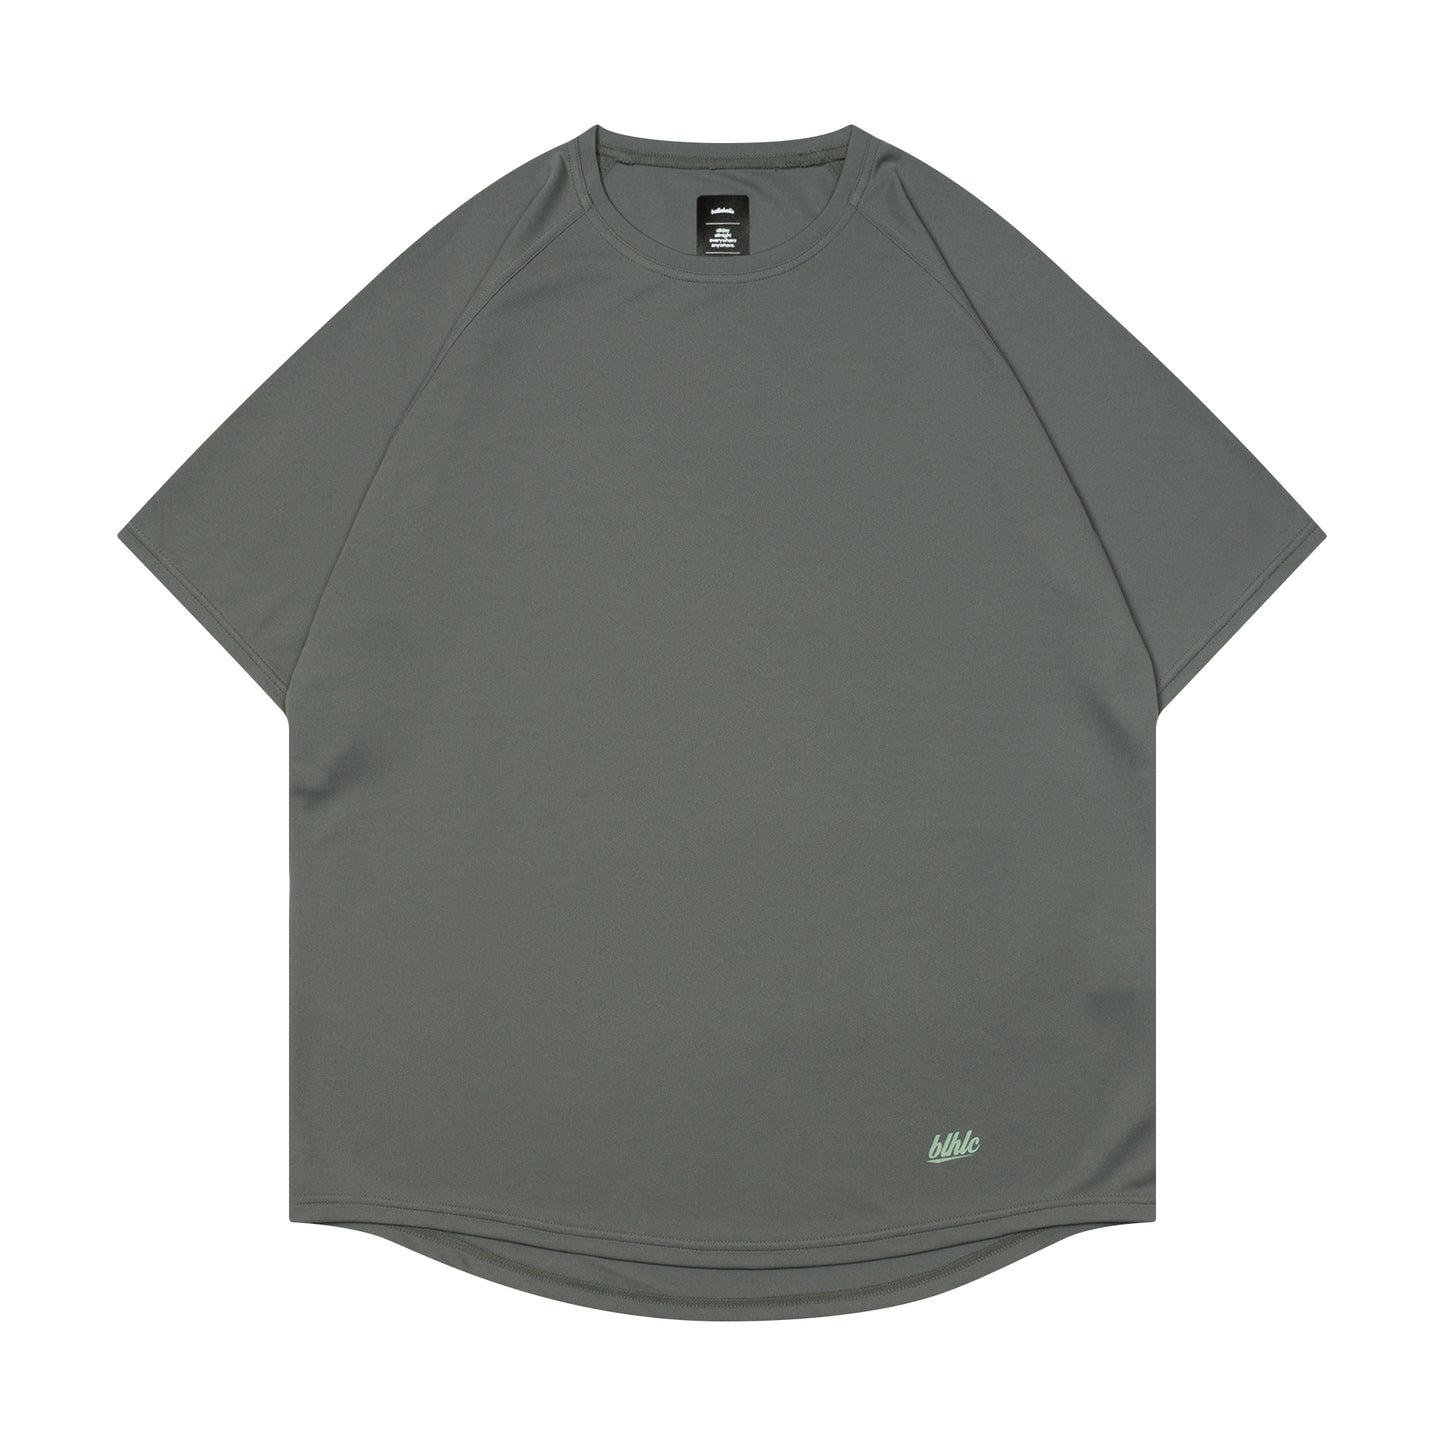 blhlc Back Print Cool Tee (charcoal gray/south)